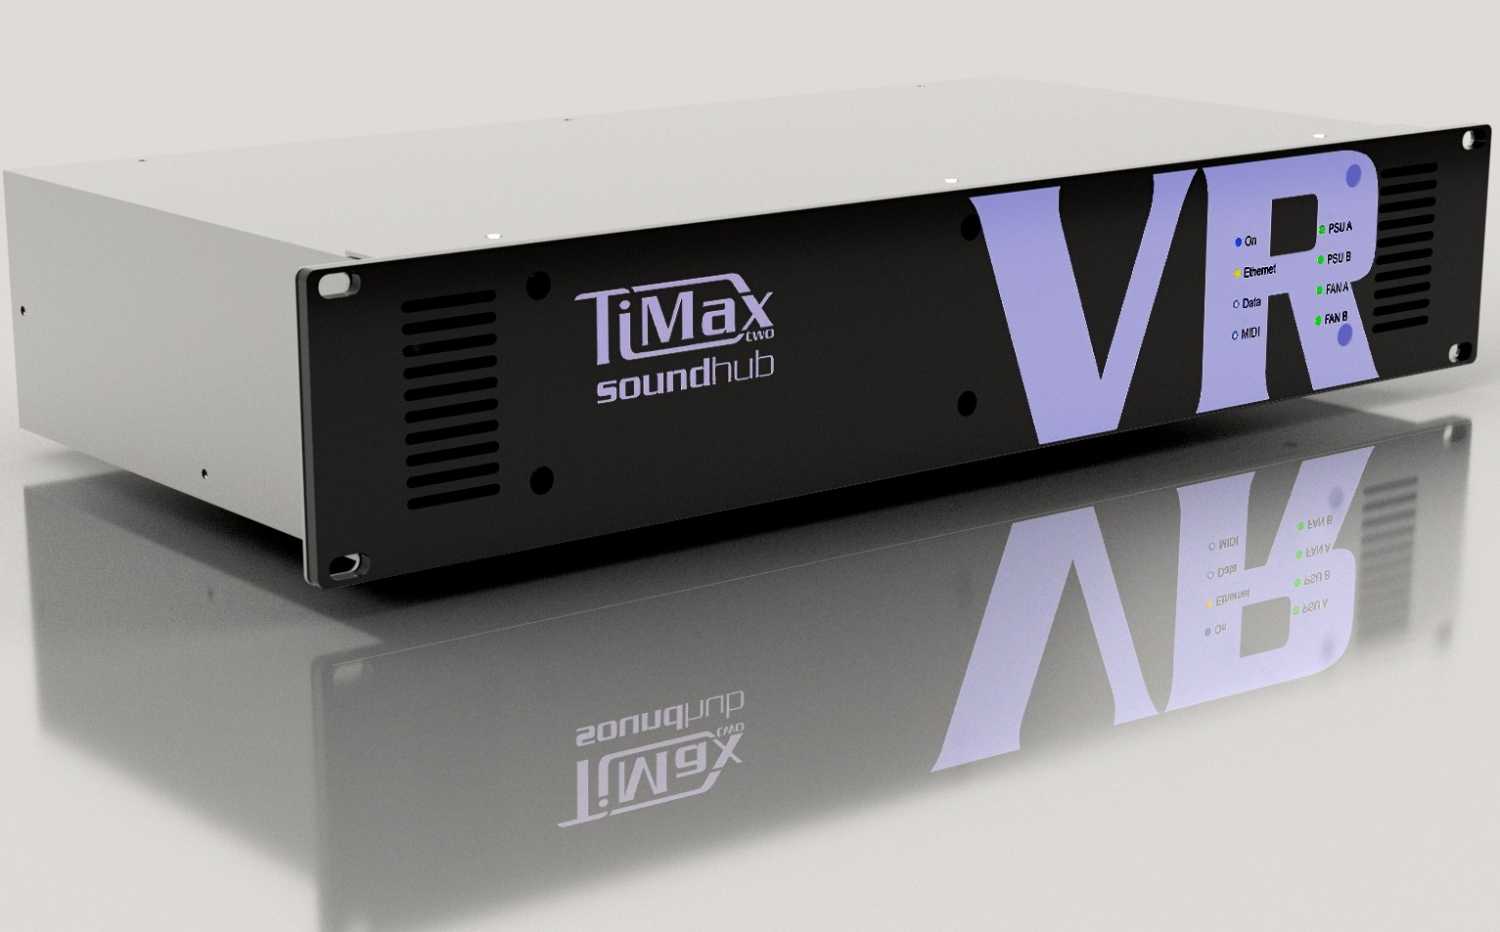 The TiMax SoundHub VR playback, spatial audio and show control variant